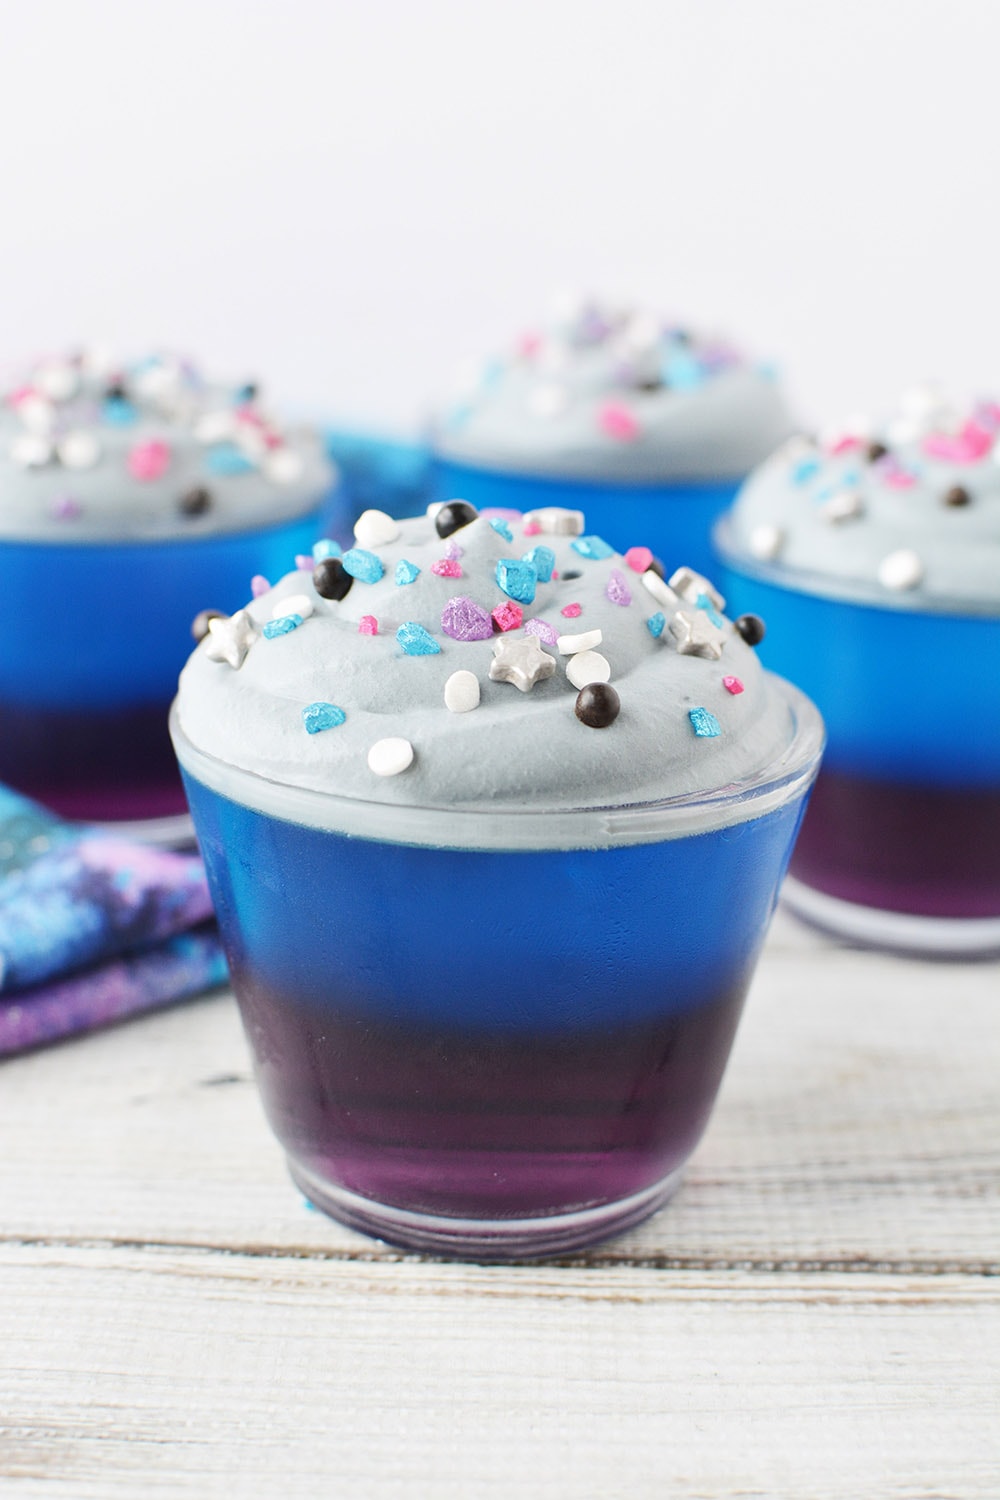 Layered jello topped with gray whipped cream and galaxy sprinkles